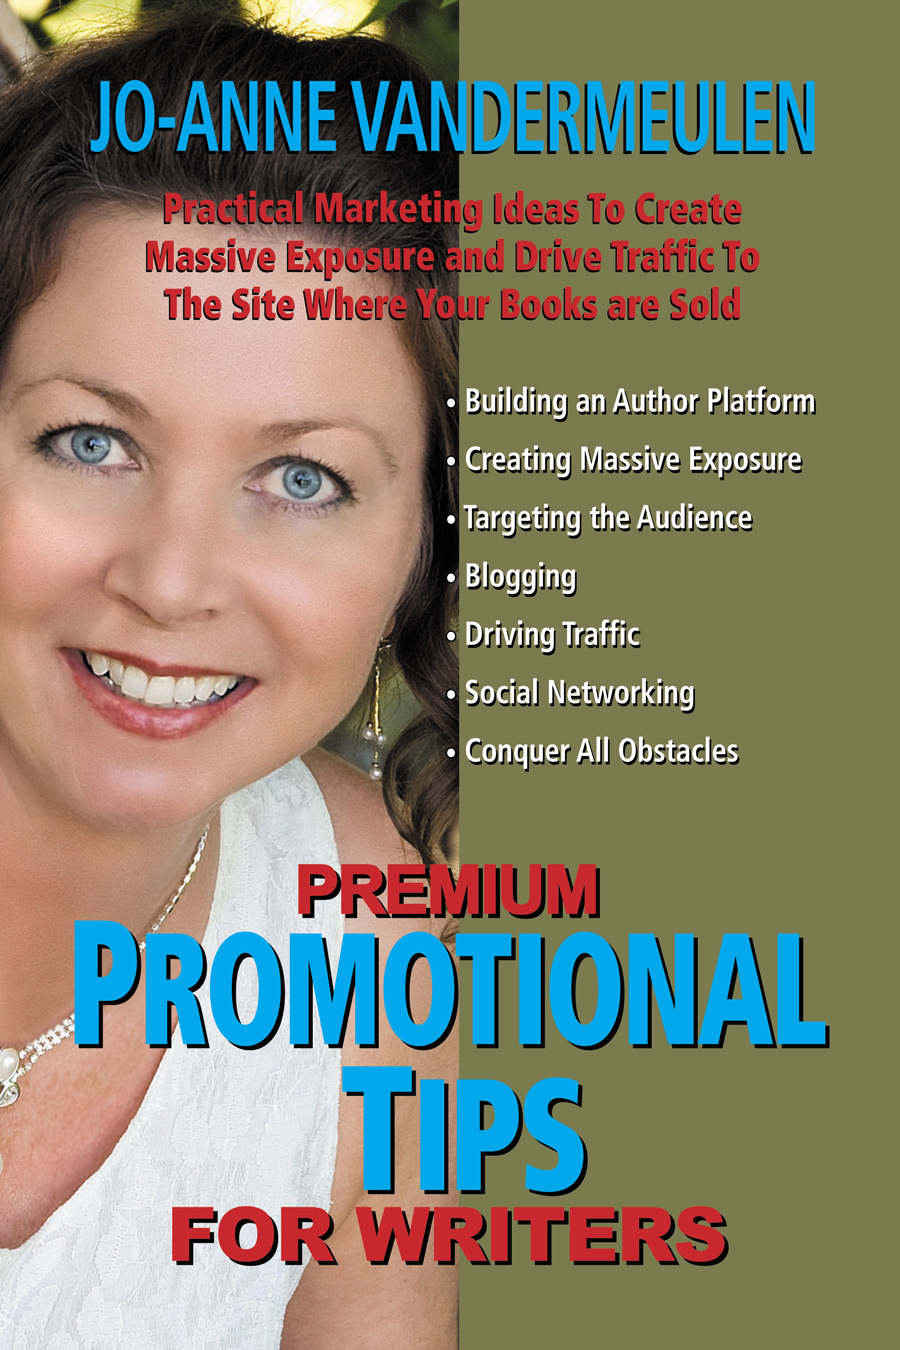 Premium Promotional Tips for Writers